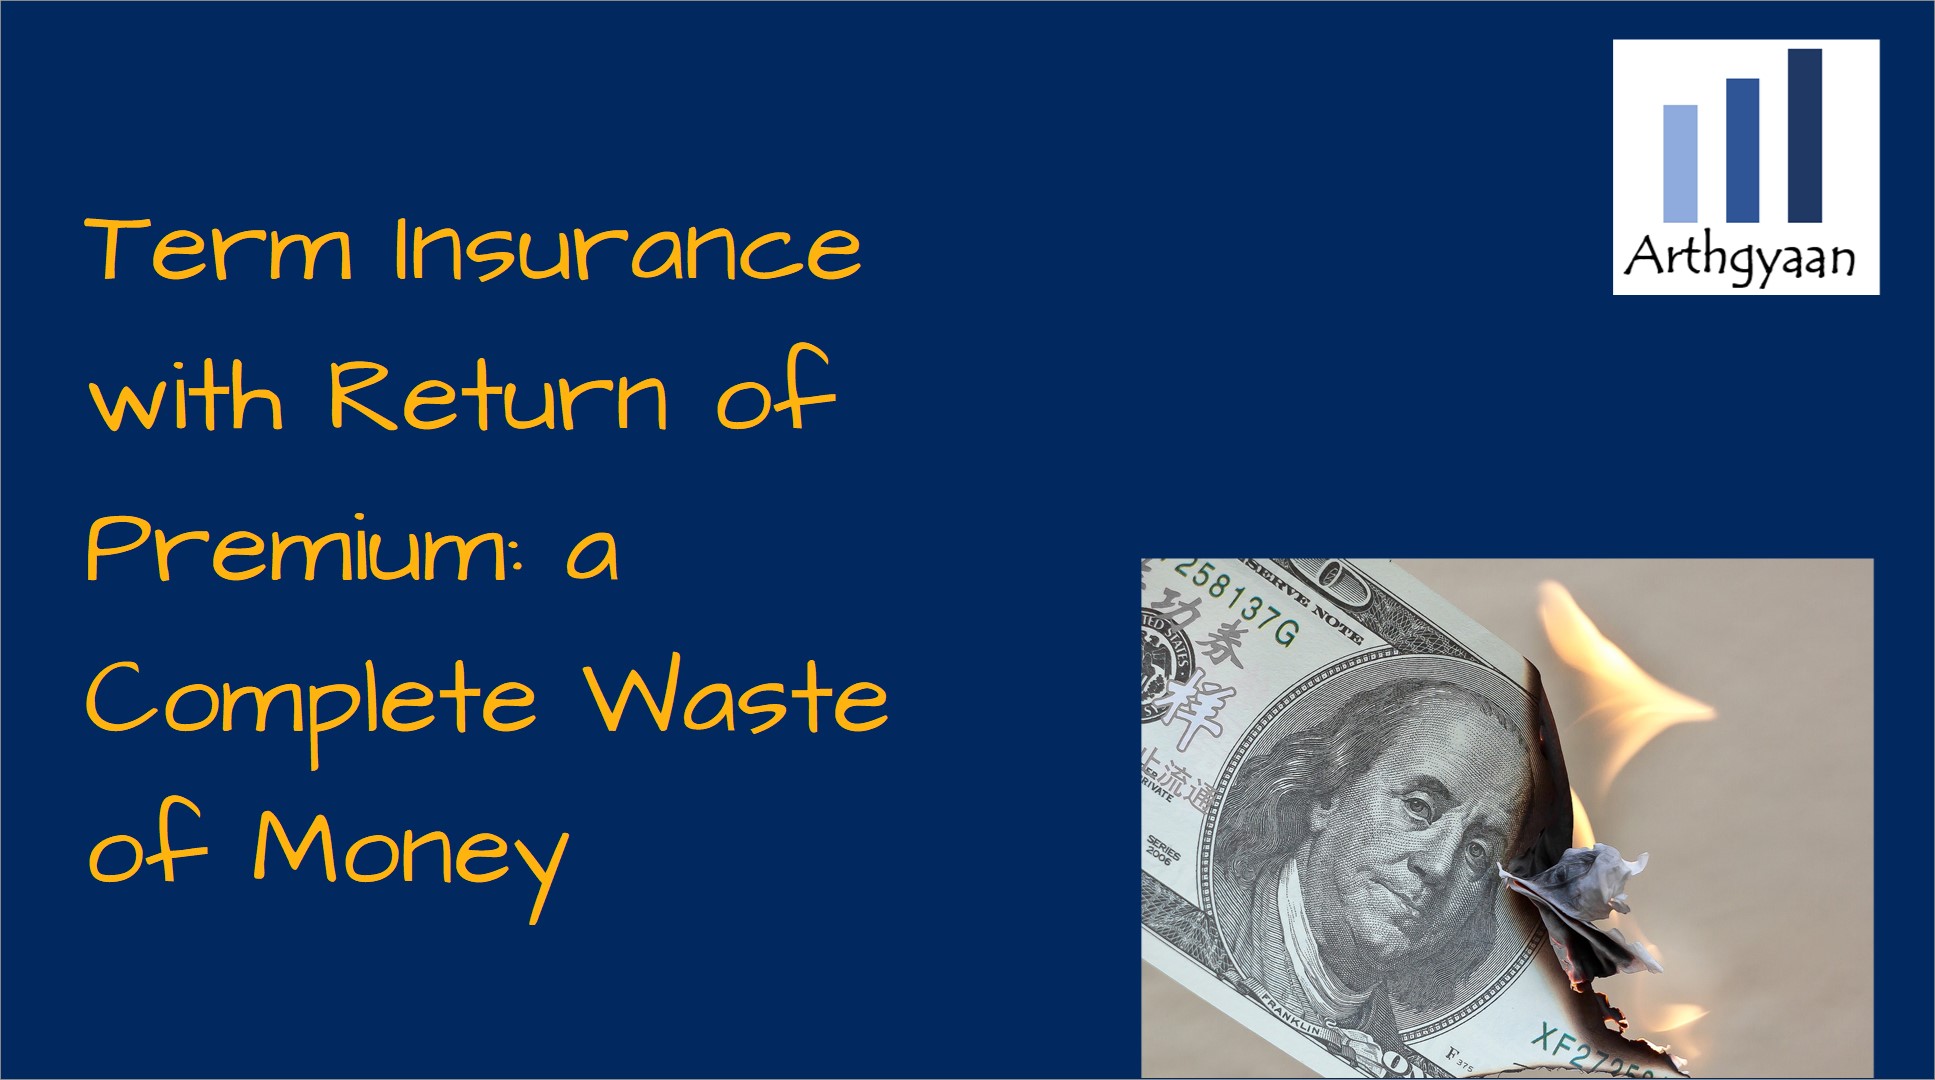 <p>This article explains why Term insurance with return of premium (TROP) is more expensive and wastes money that you should invest instead.</p>

